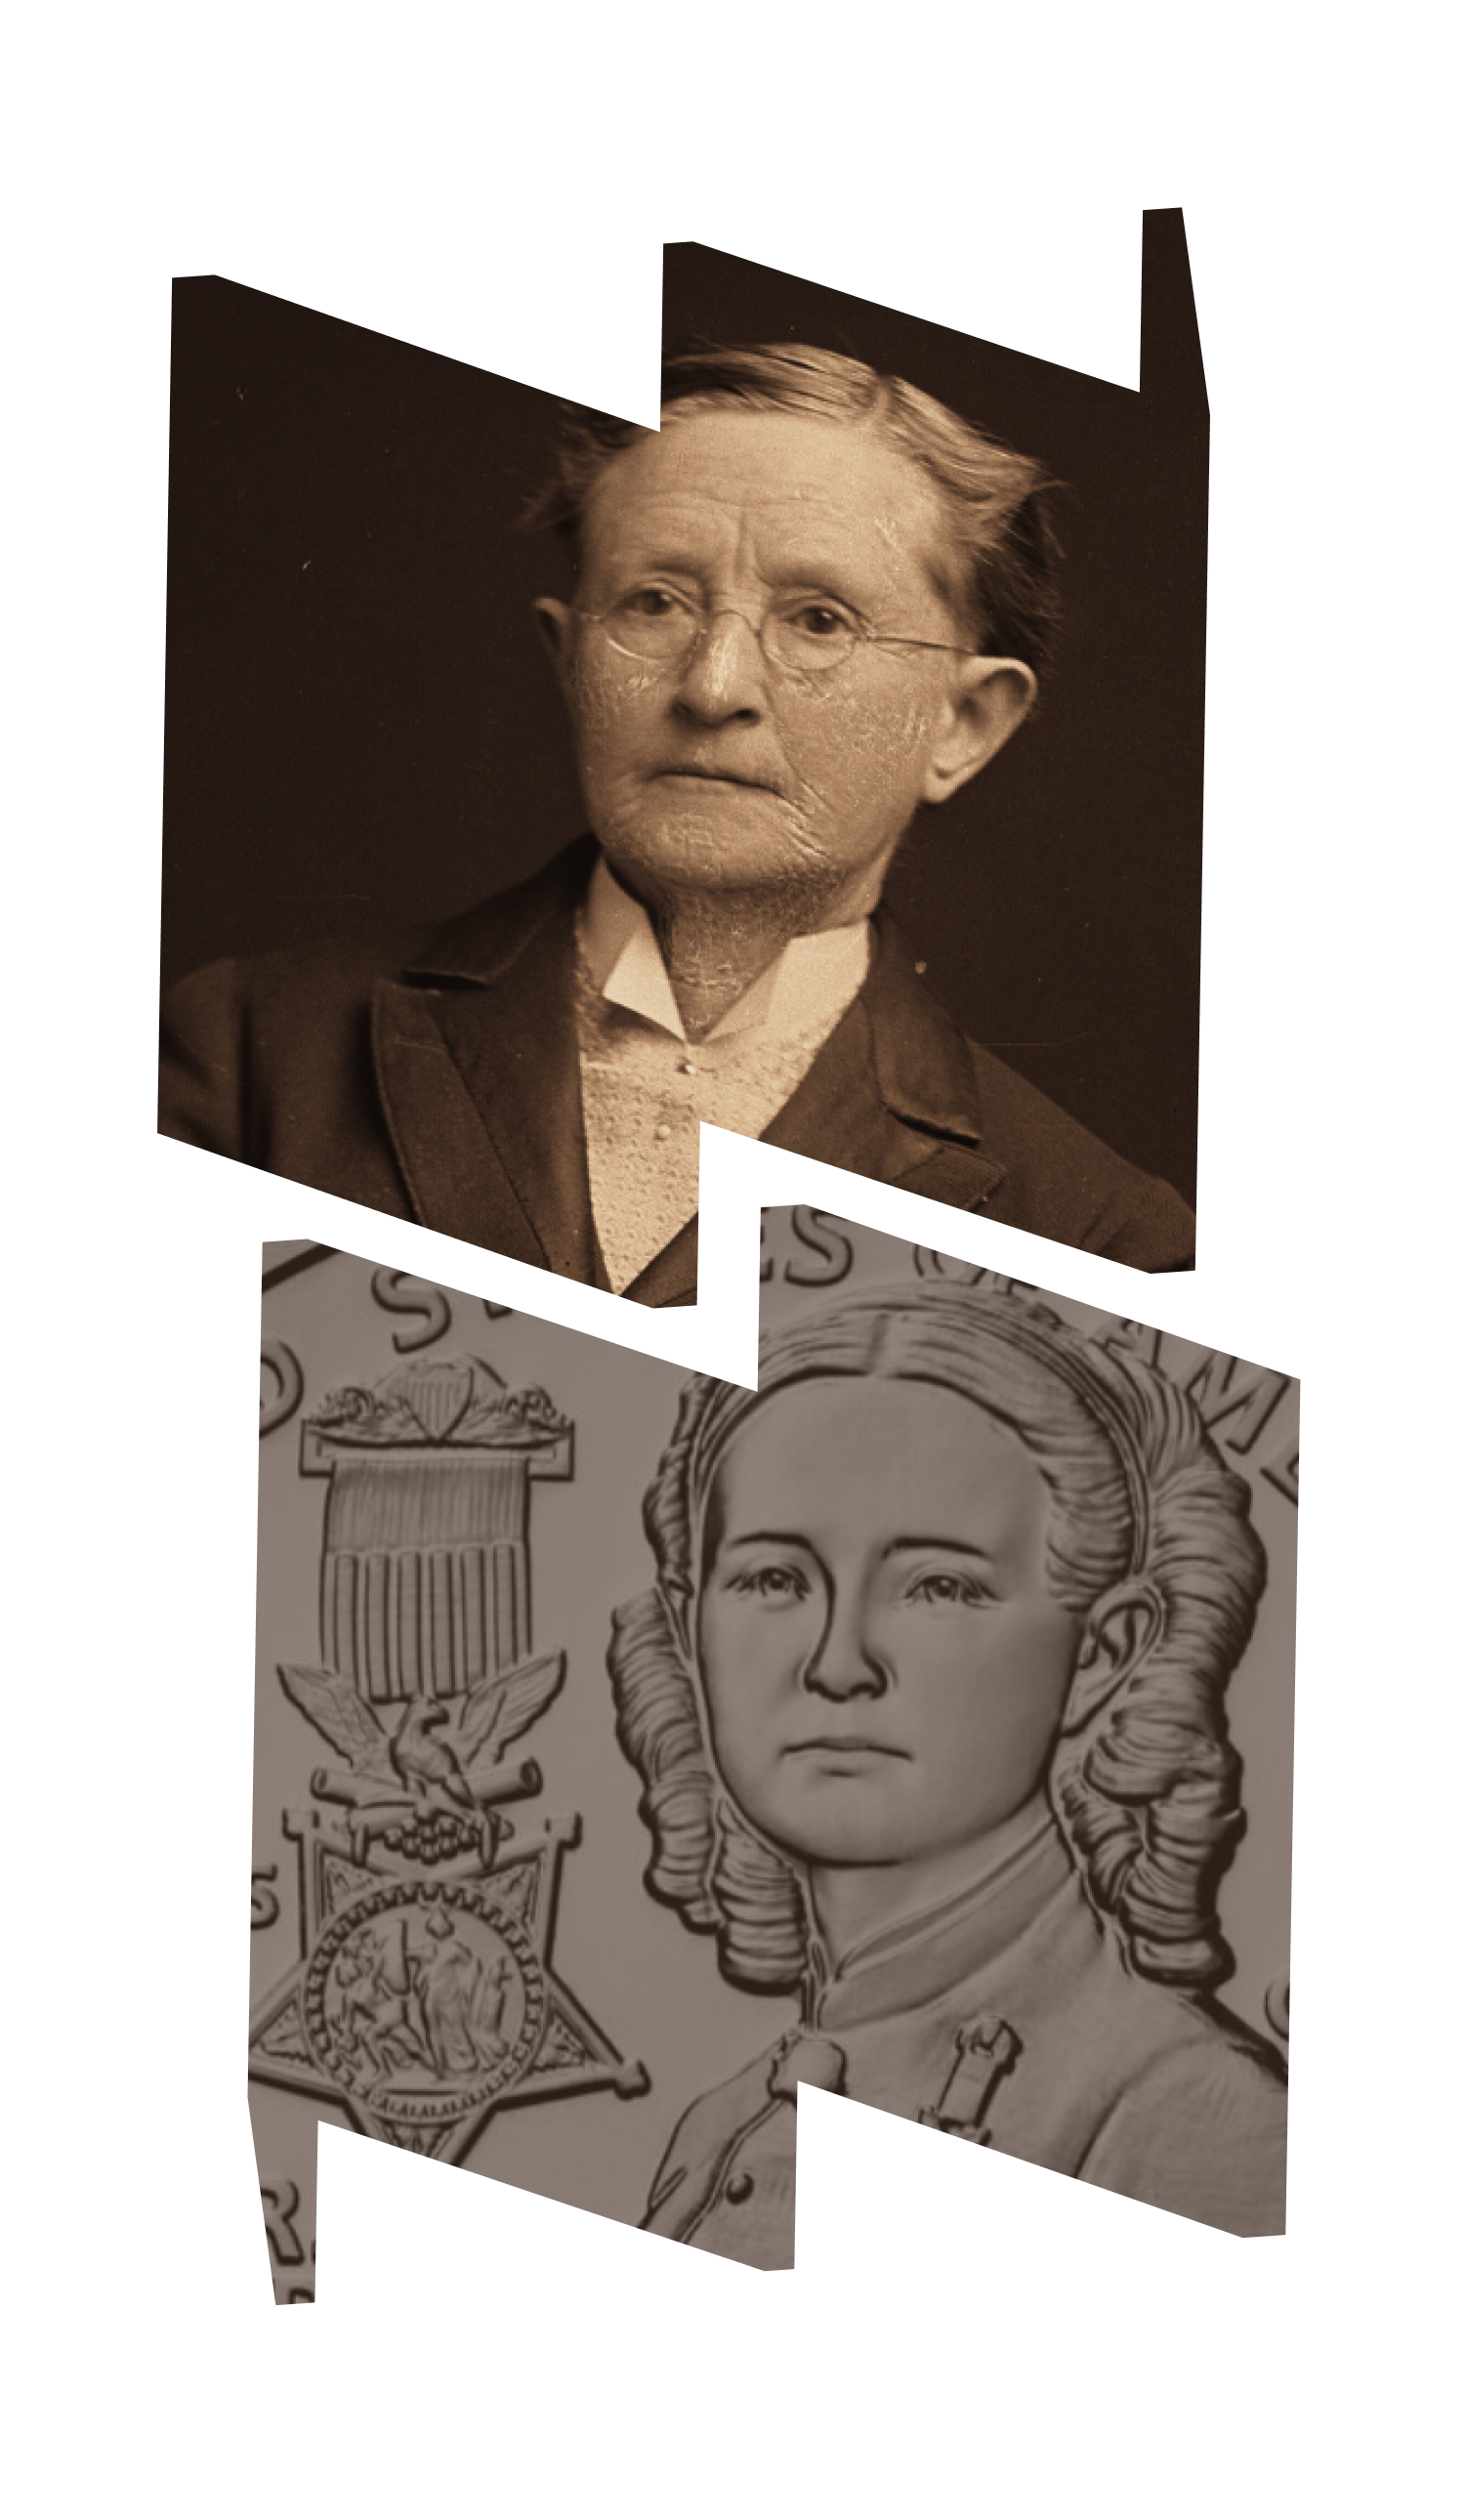 In top "W" frame, a sepia close-up of Dr. Maria Edwards Walker. In bottom "M" frame, a close-up of the new quarter with an illustration of Walker. 